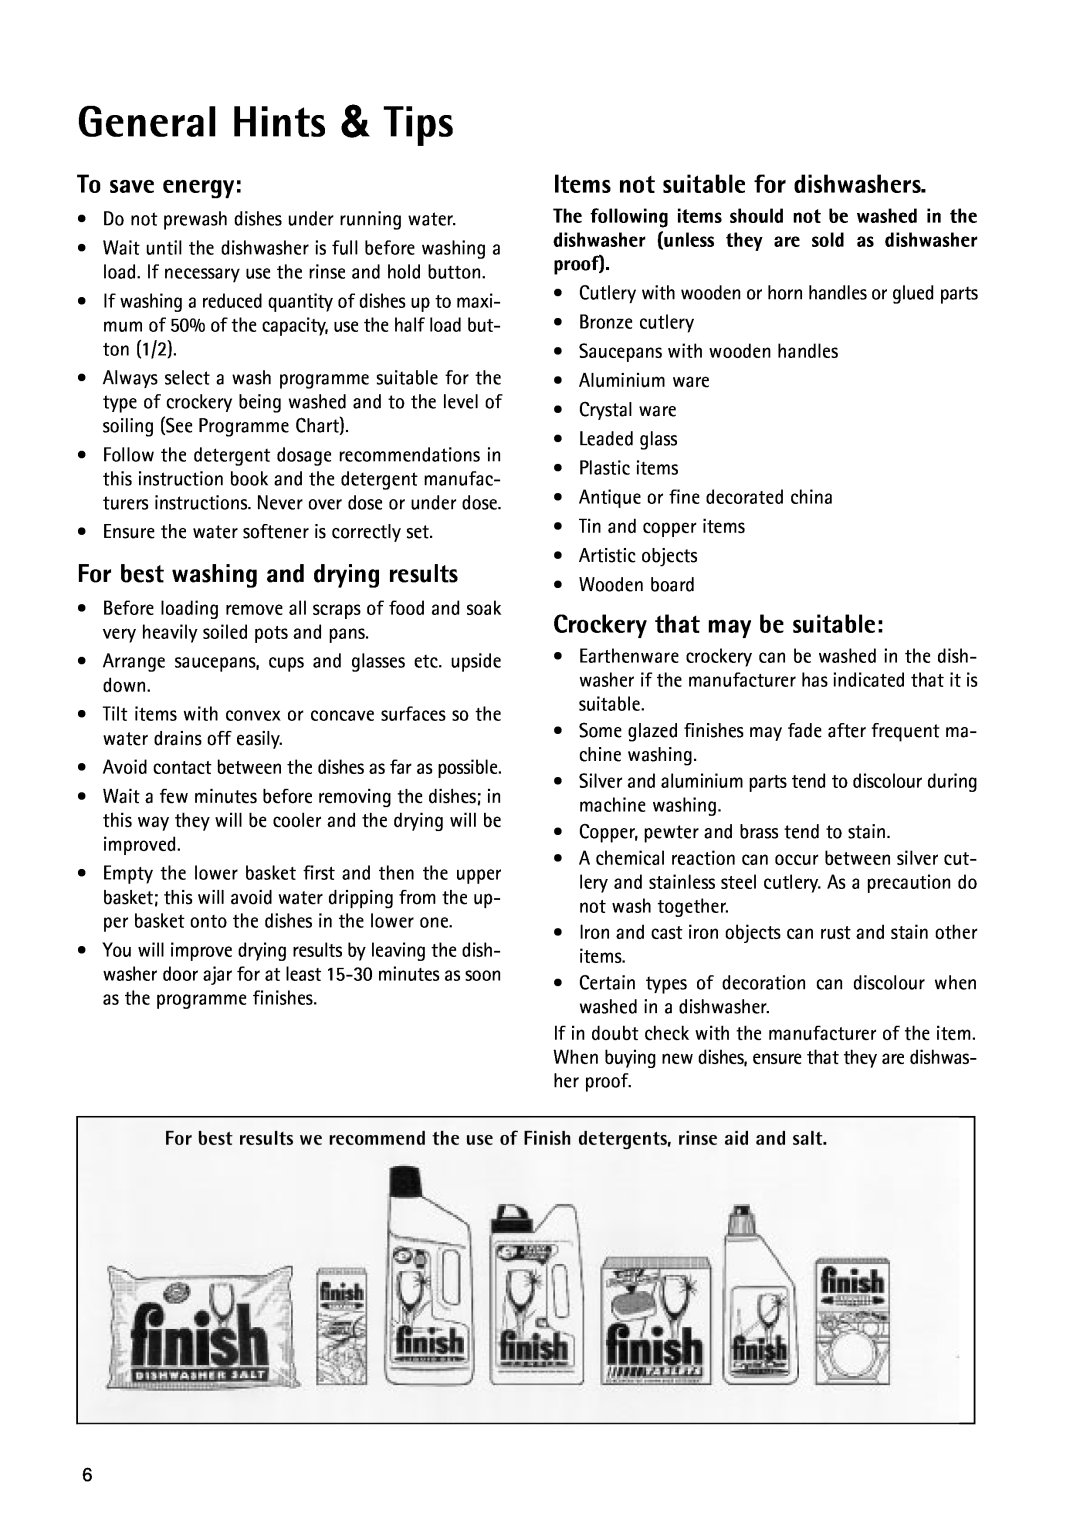 Electrolux 55750 General Hints & Tips, To save energy, For best washing and drying results, Crockery that may be suitable 